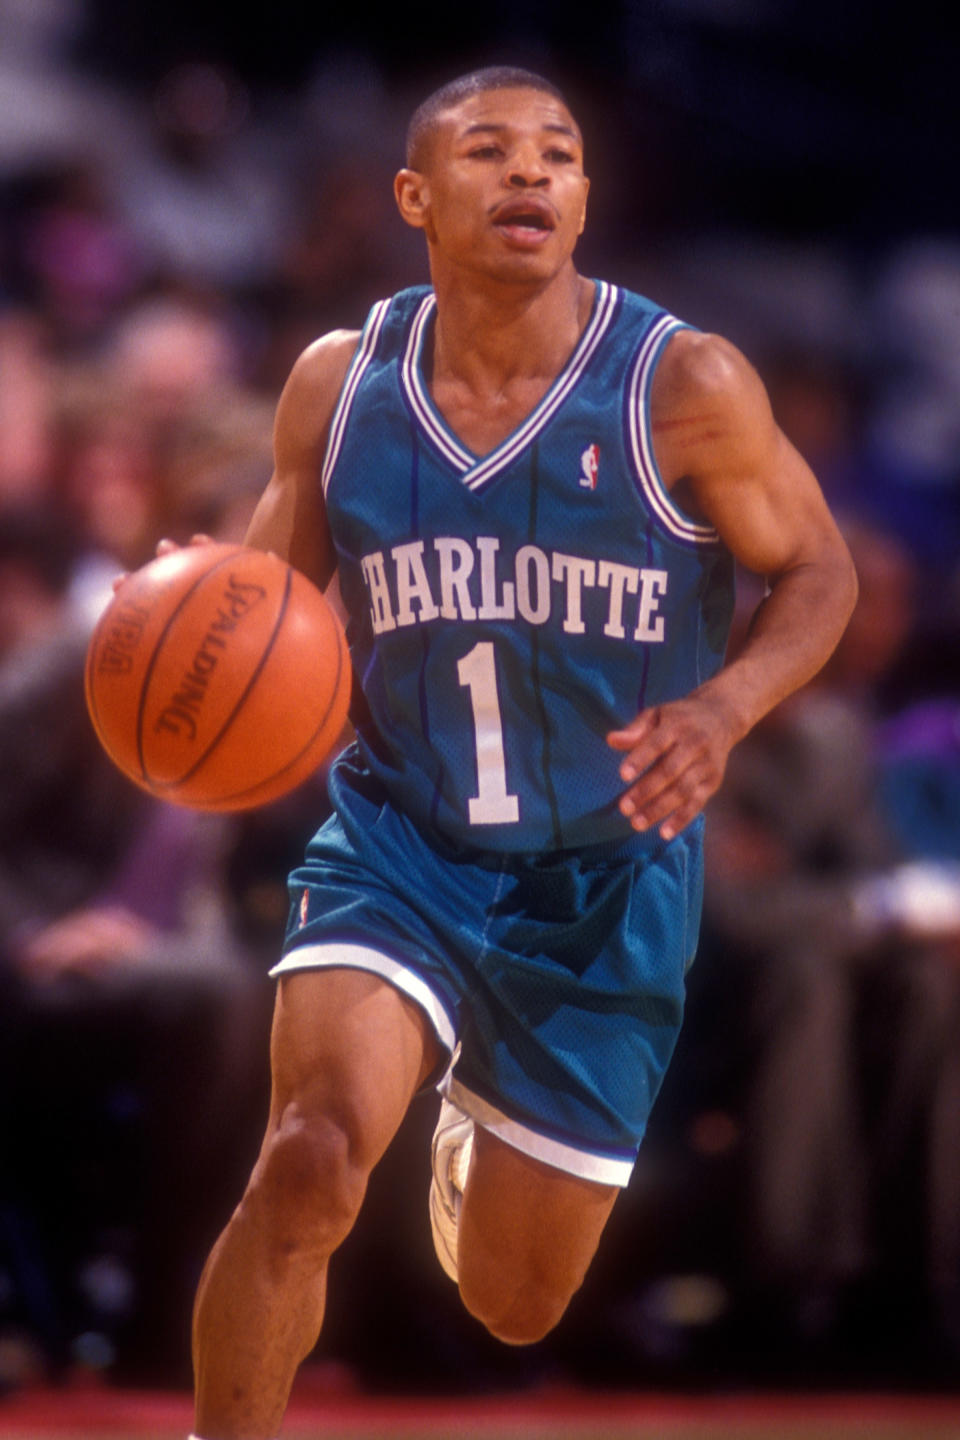 Muggsy Bogues。(Photo by Mitchell Layton/Getty Images)